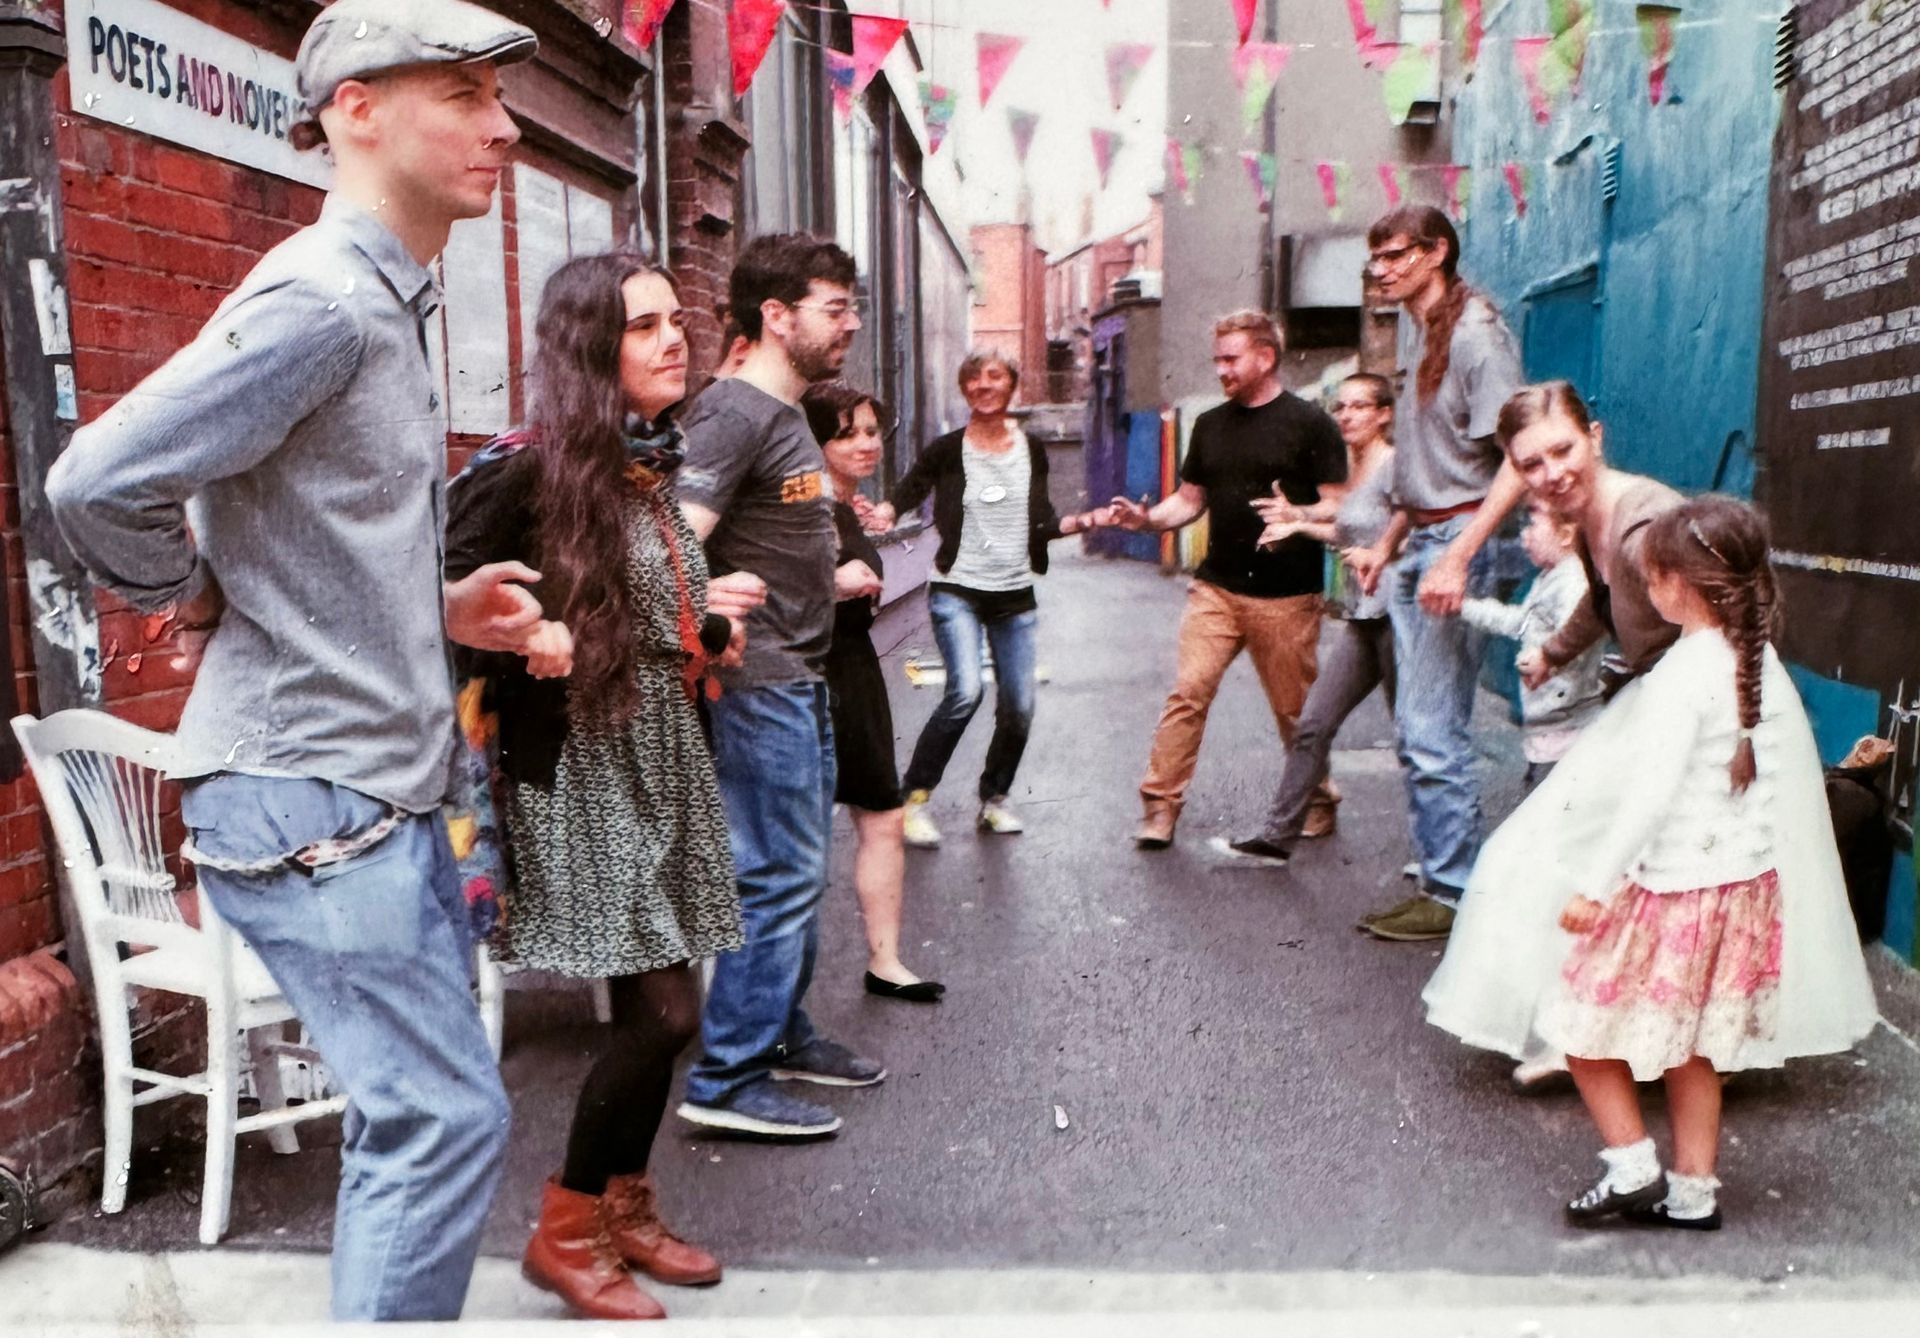 People dance outside the Icon Factory in the now accessible laneways